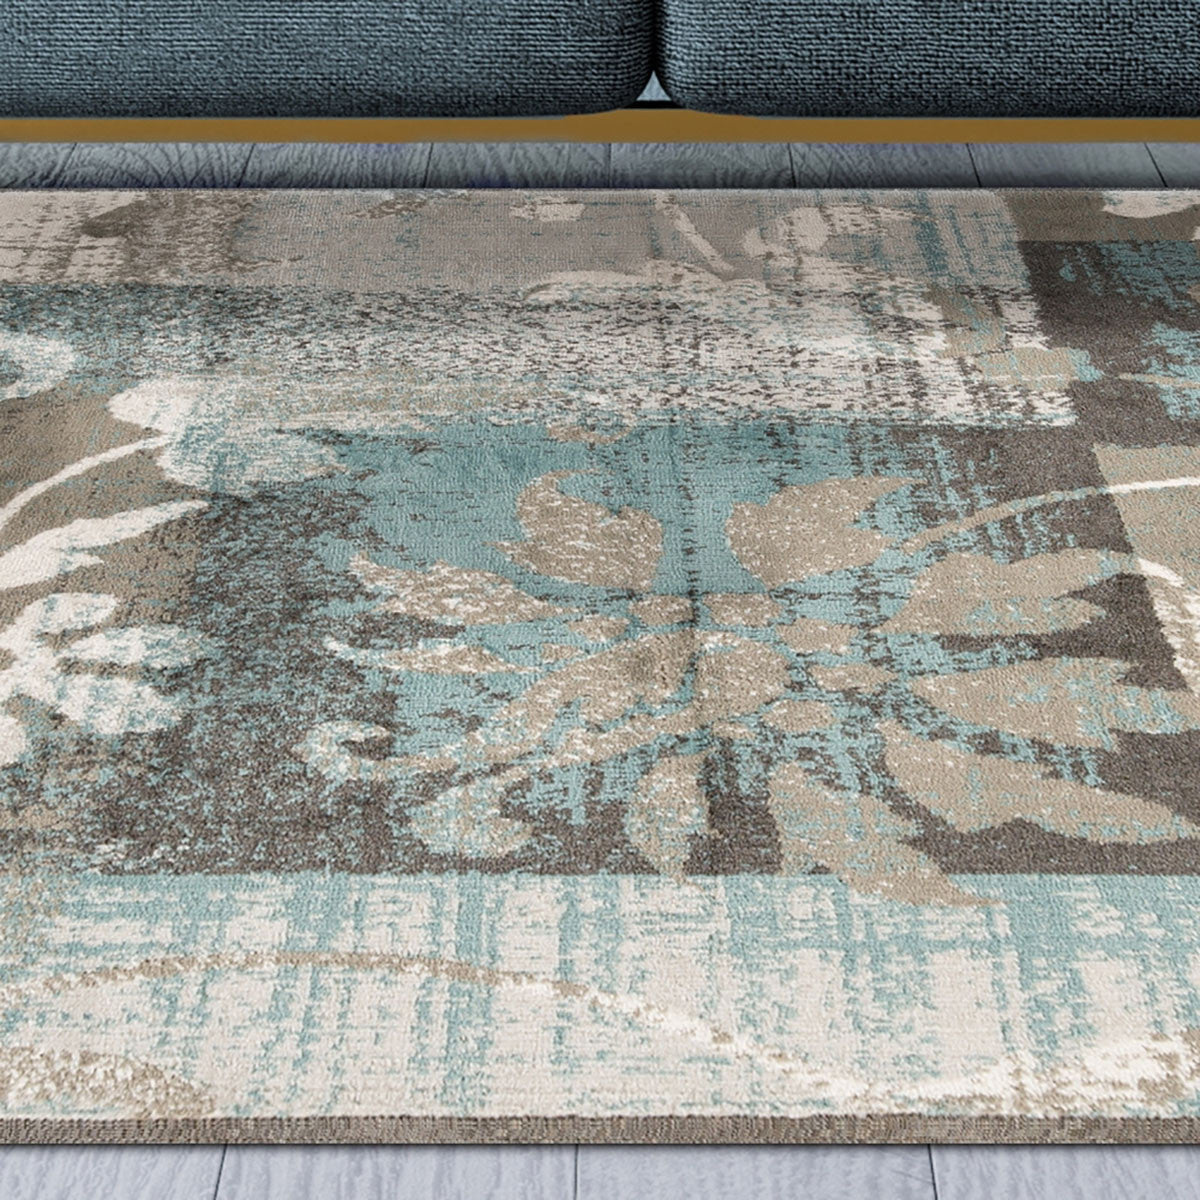 7' X 9' Teal Gray And Tan Floral Power Loom Distressed Stain Resistant Area Rug